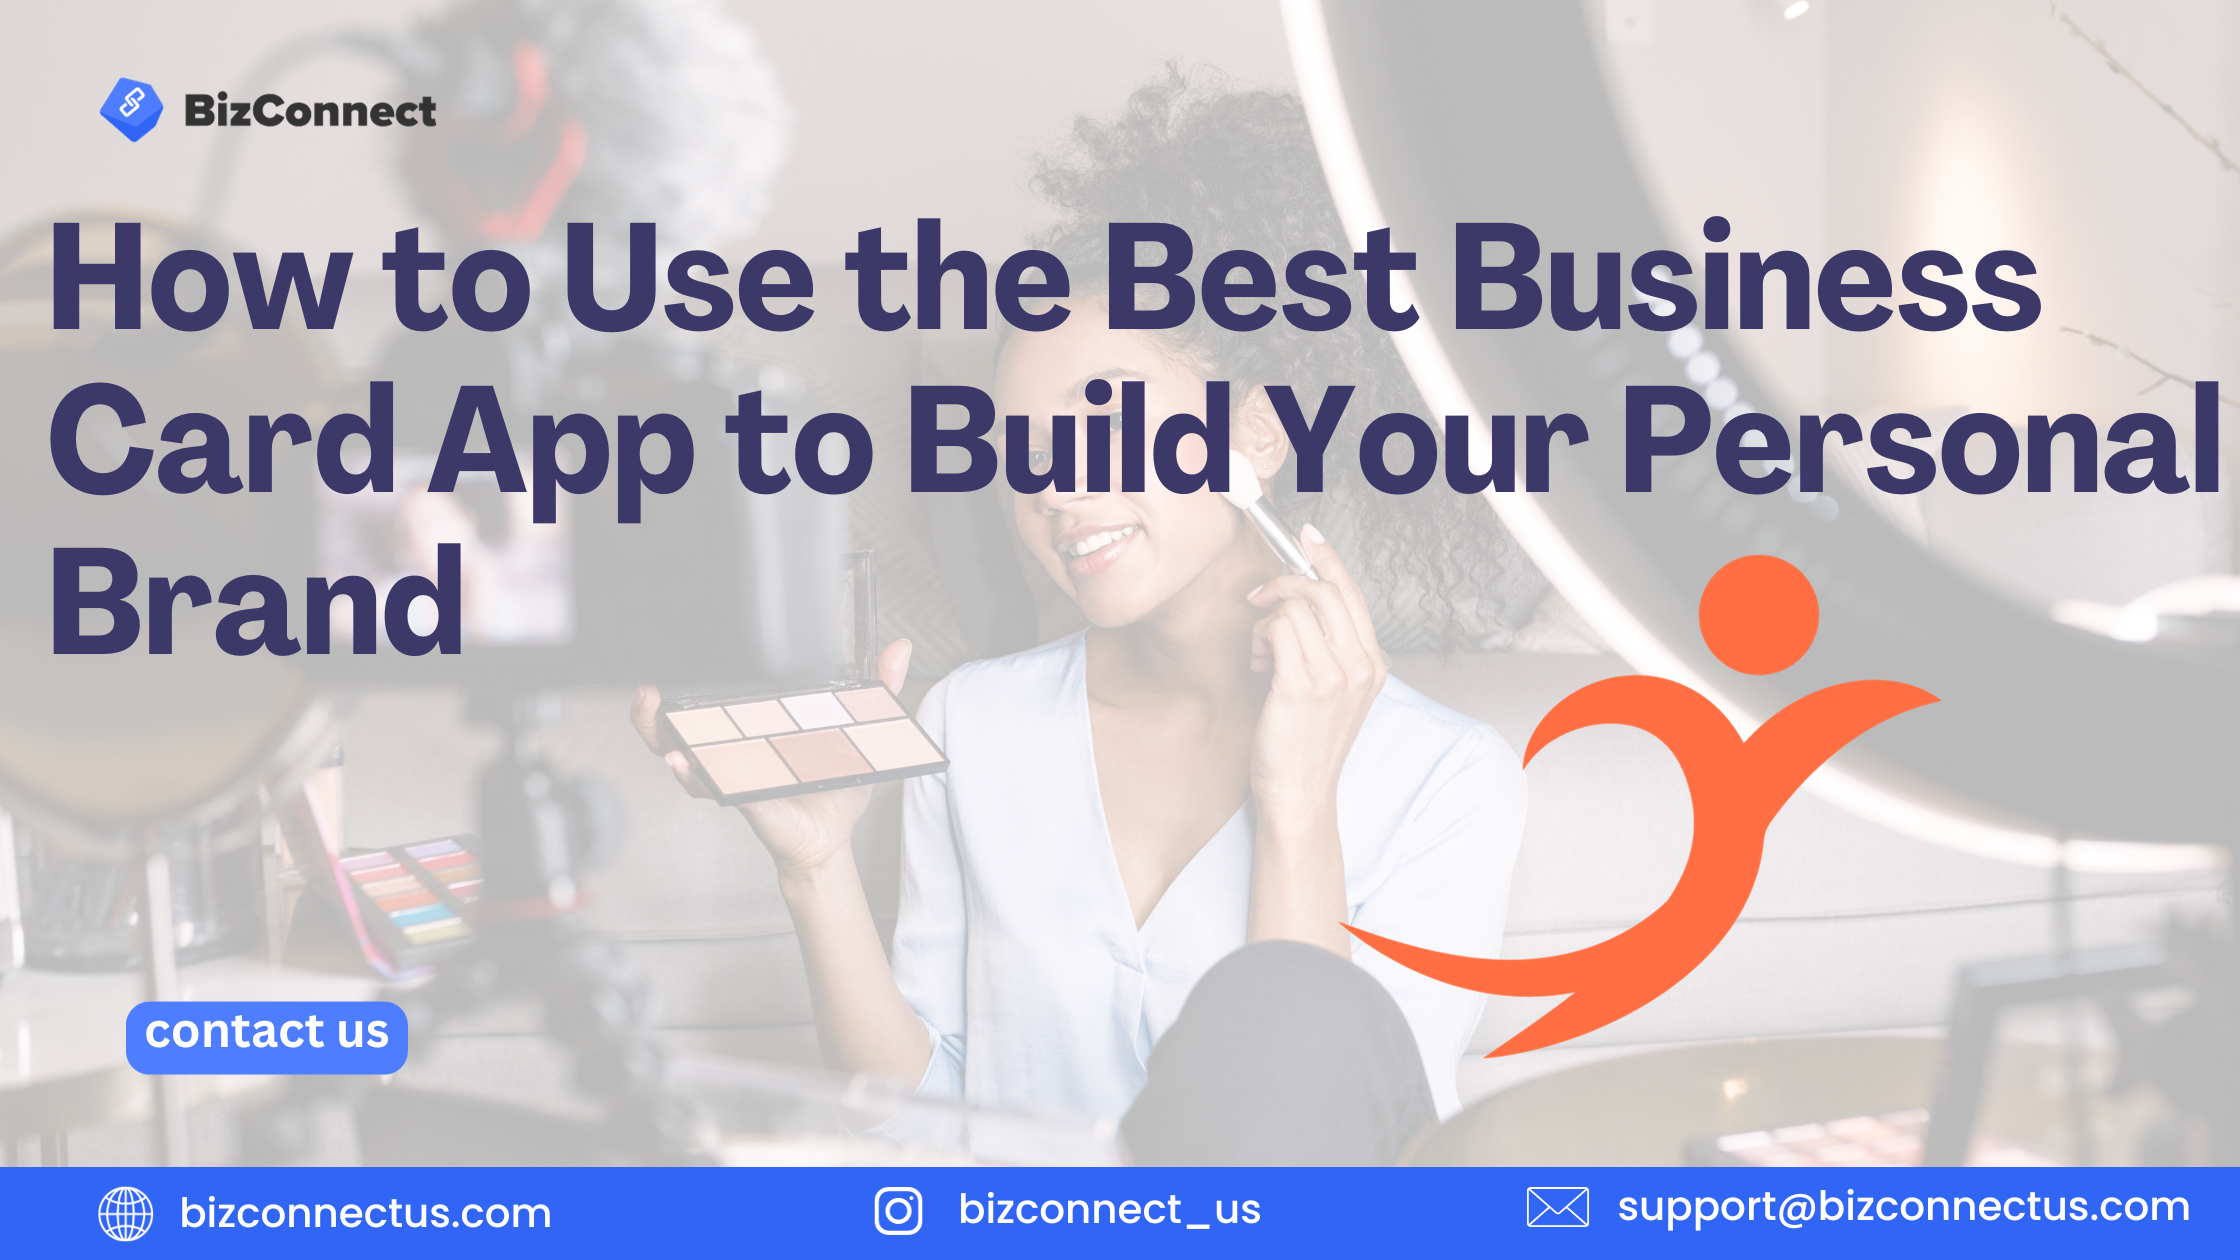 How to Use the Best Business Card App to Build Your Personal Brand